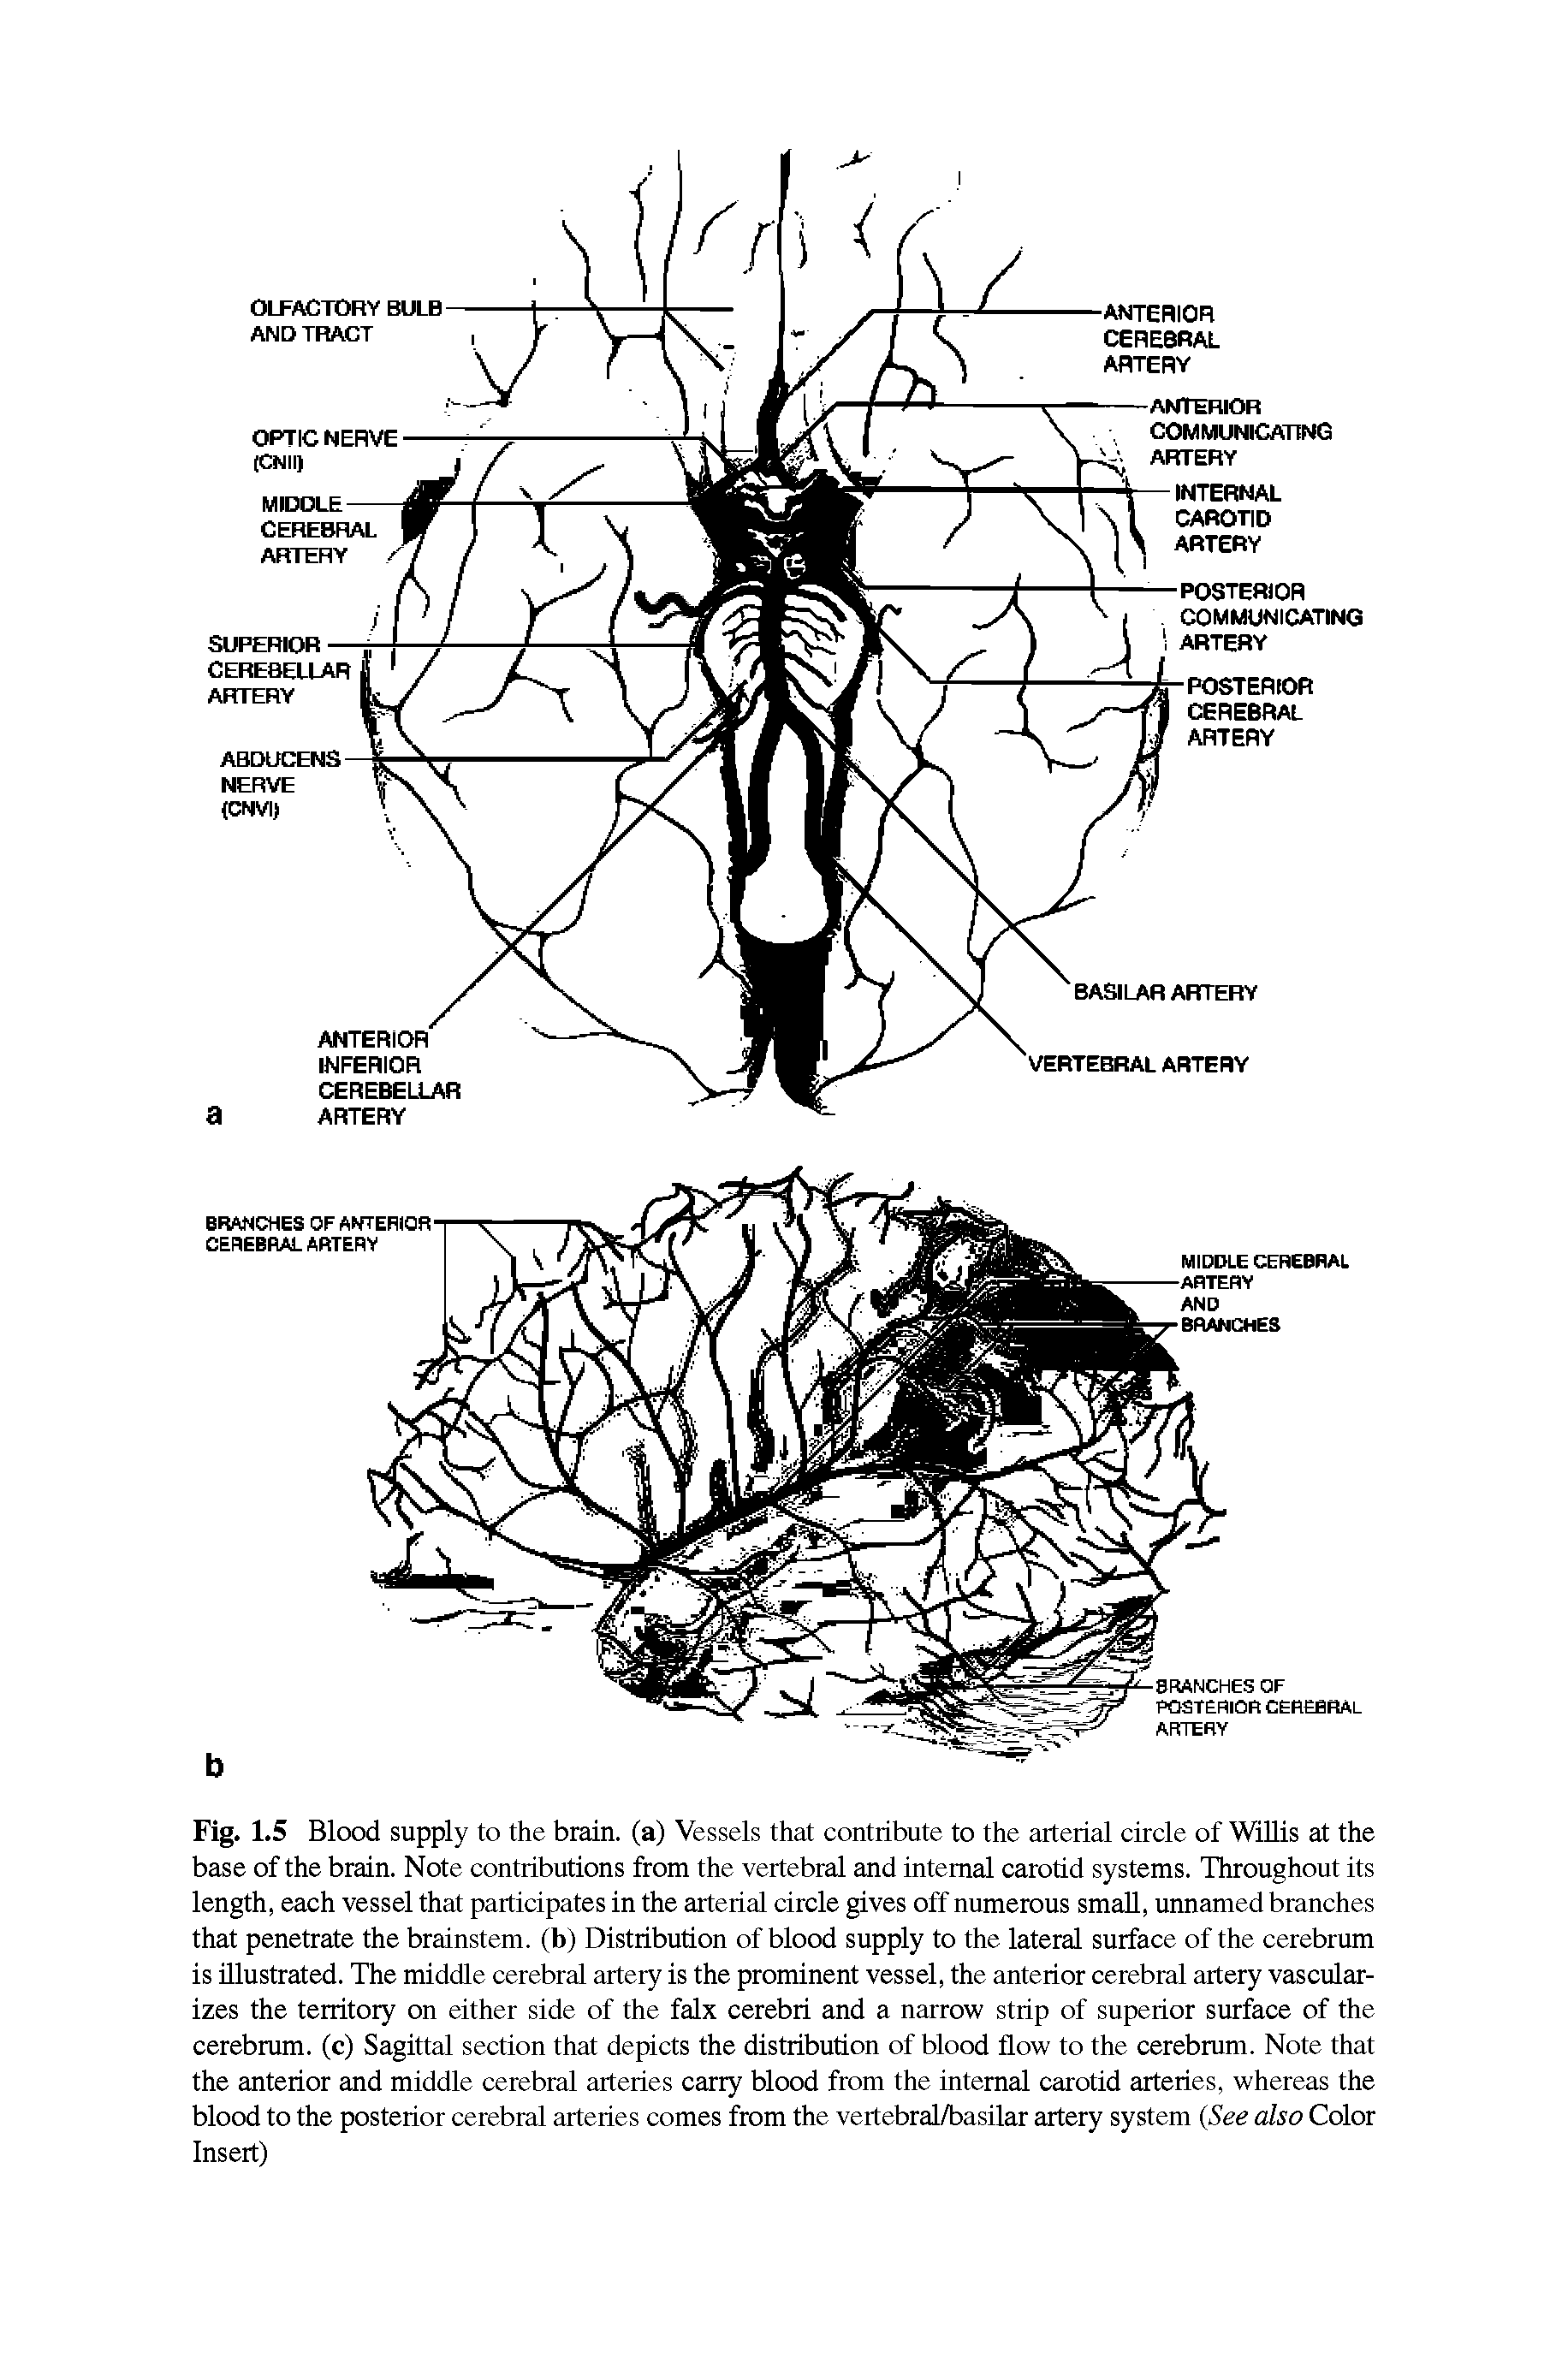 Fig. 1.5 Blood supply to the brain, (a) Vessels that contribute to the arterial circle of WrUis at the base of the brain. Note contributions from the vertebral and internal carotid systems. Throughout its length, each vessel that participates in the arterial circle gives off nrtmerous small, tmnamed branches that penetrate the brainstem, (b) Distribution of blood supply to the lateral surface of the cerebrum is illustrated. The middle cerebral artery is the prominent vessel, the anterior cerebral artery vascularizes the territory on either side of the falx cerebri and a narrow strip of superior surface of the cerebrum, (c) Sagittal section that depicts the distribution of blood flow to the cerebrum. Note that the anterior and middle cerebral arteries carry blood from the internal carotid arteries, whereas the blood to the posterior cerebral arteries comes from the vertebral/basilar artery system (See also Color Insert)...